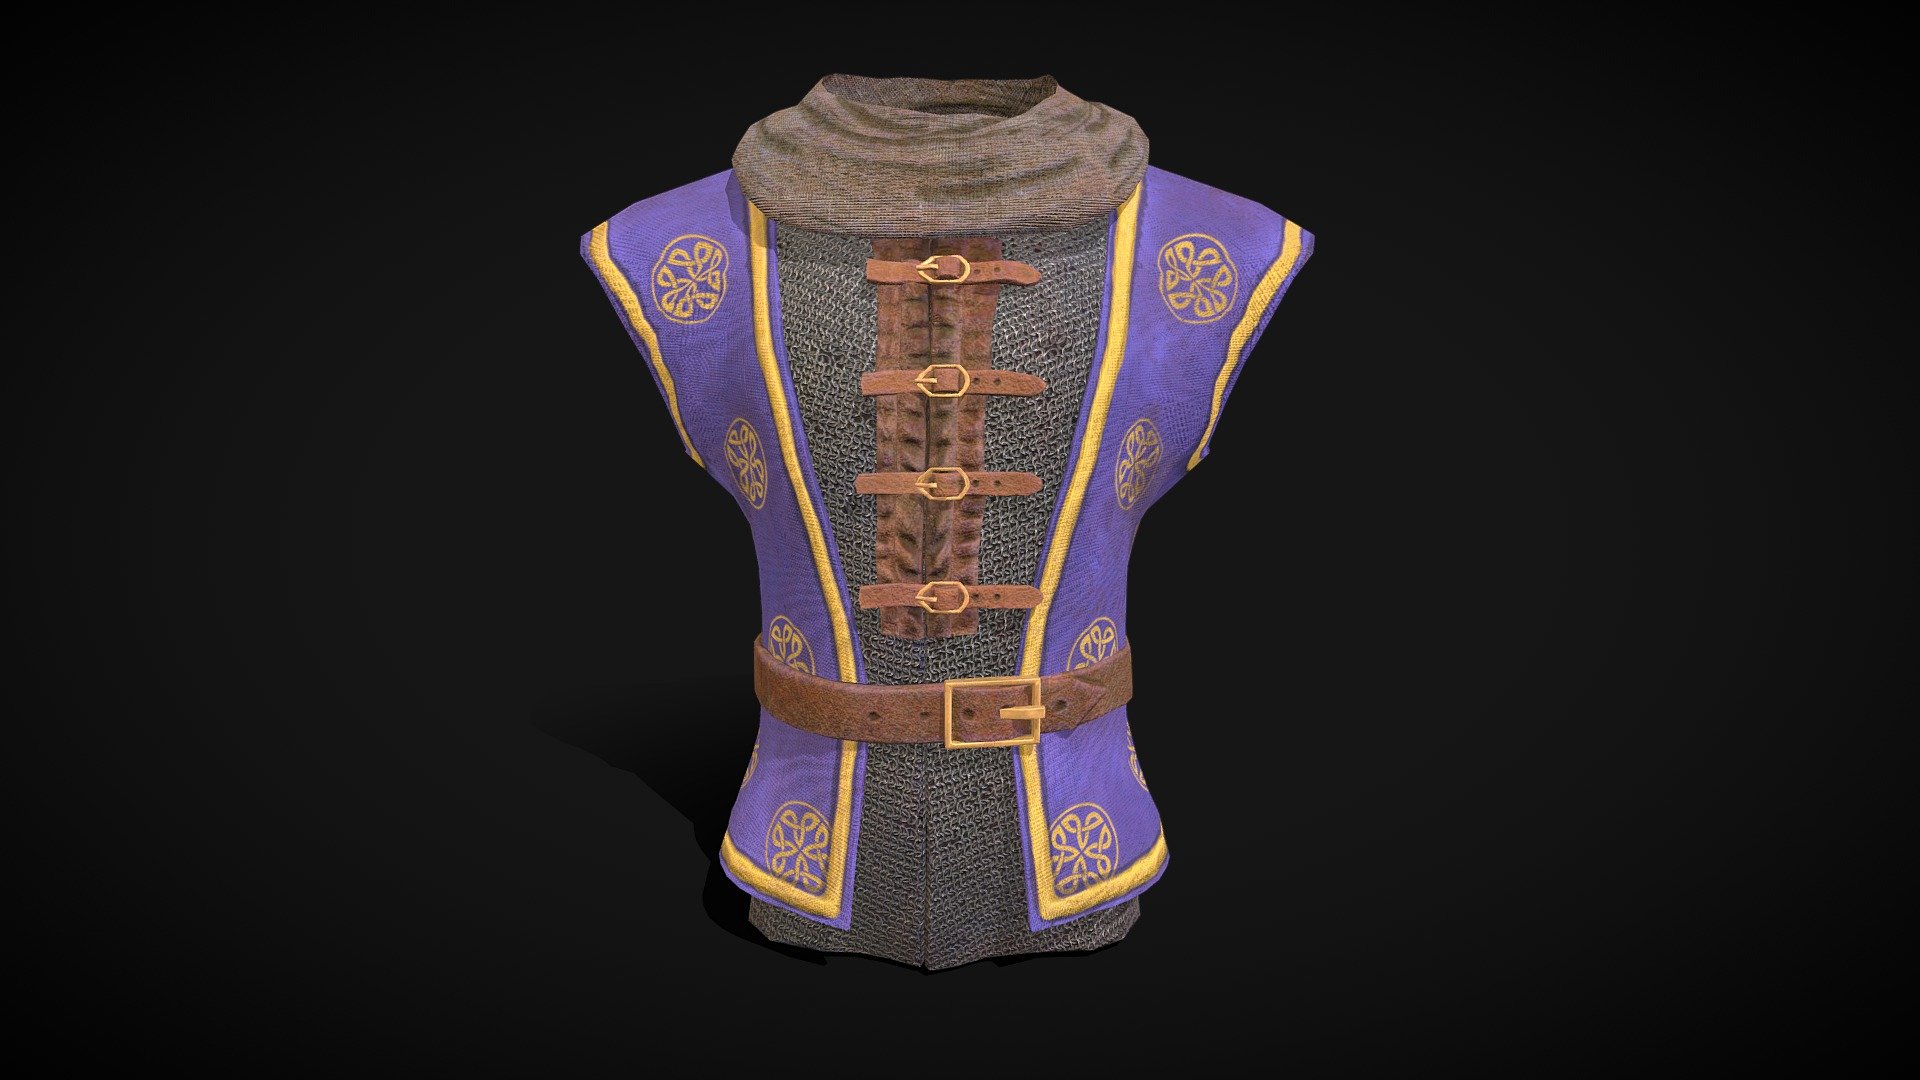 Made for Faes AR an #RPG #AR #Game #app a Cleric Armor with #zbrush #Maya #substancepainter and #marmoset if you want commission works for games, 3d print or argames I can do it 3d model